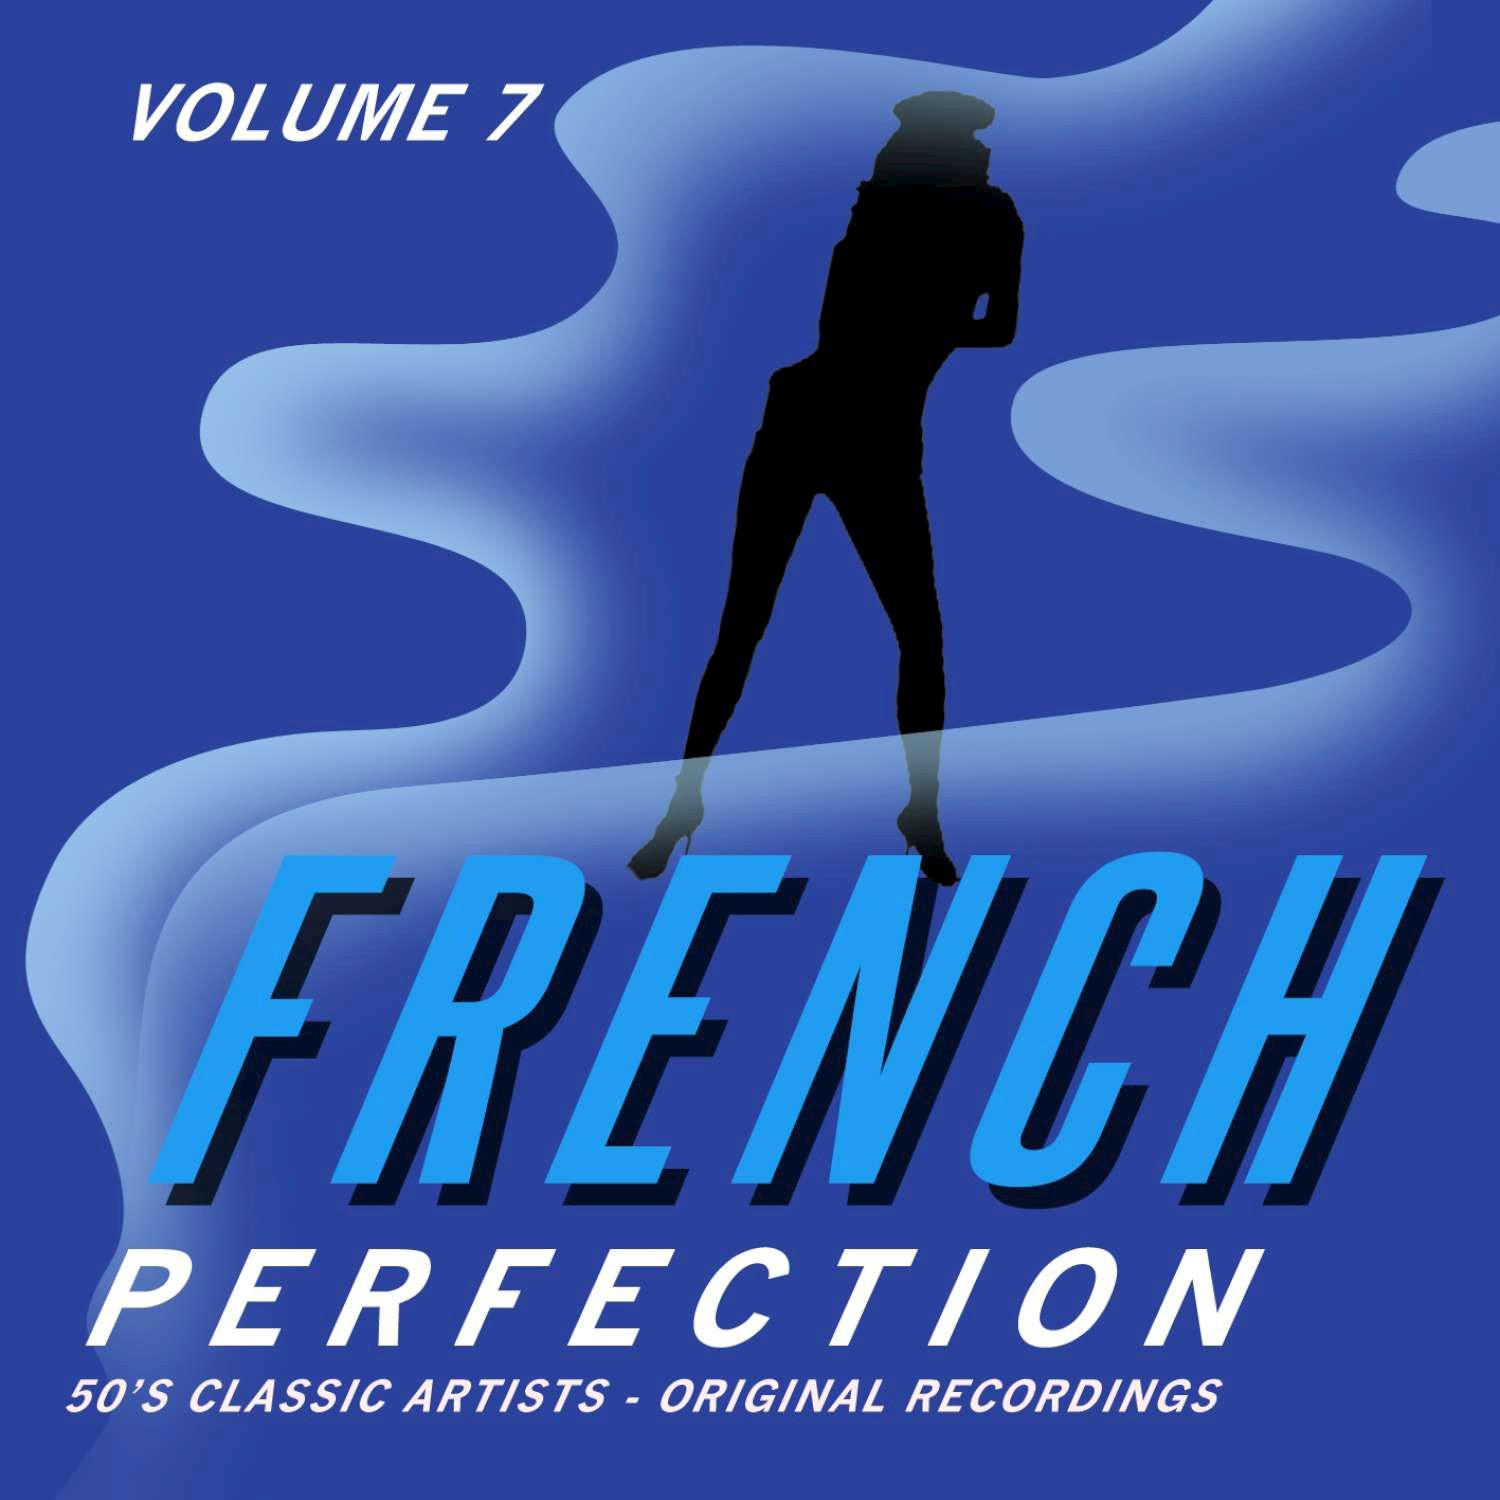 French Perfection, Vol. 7 - 50's Classic Artists (Original Recordings)